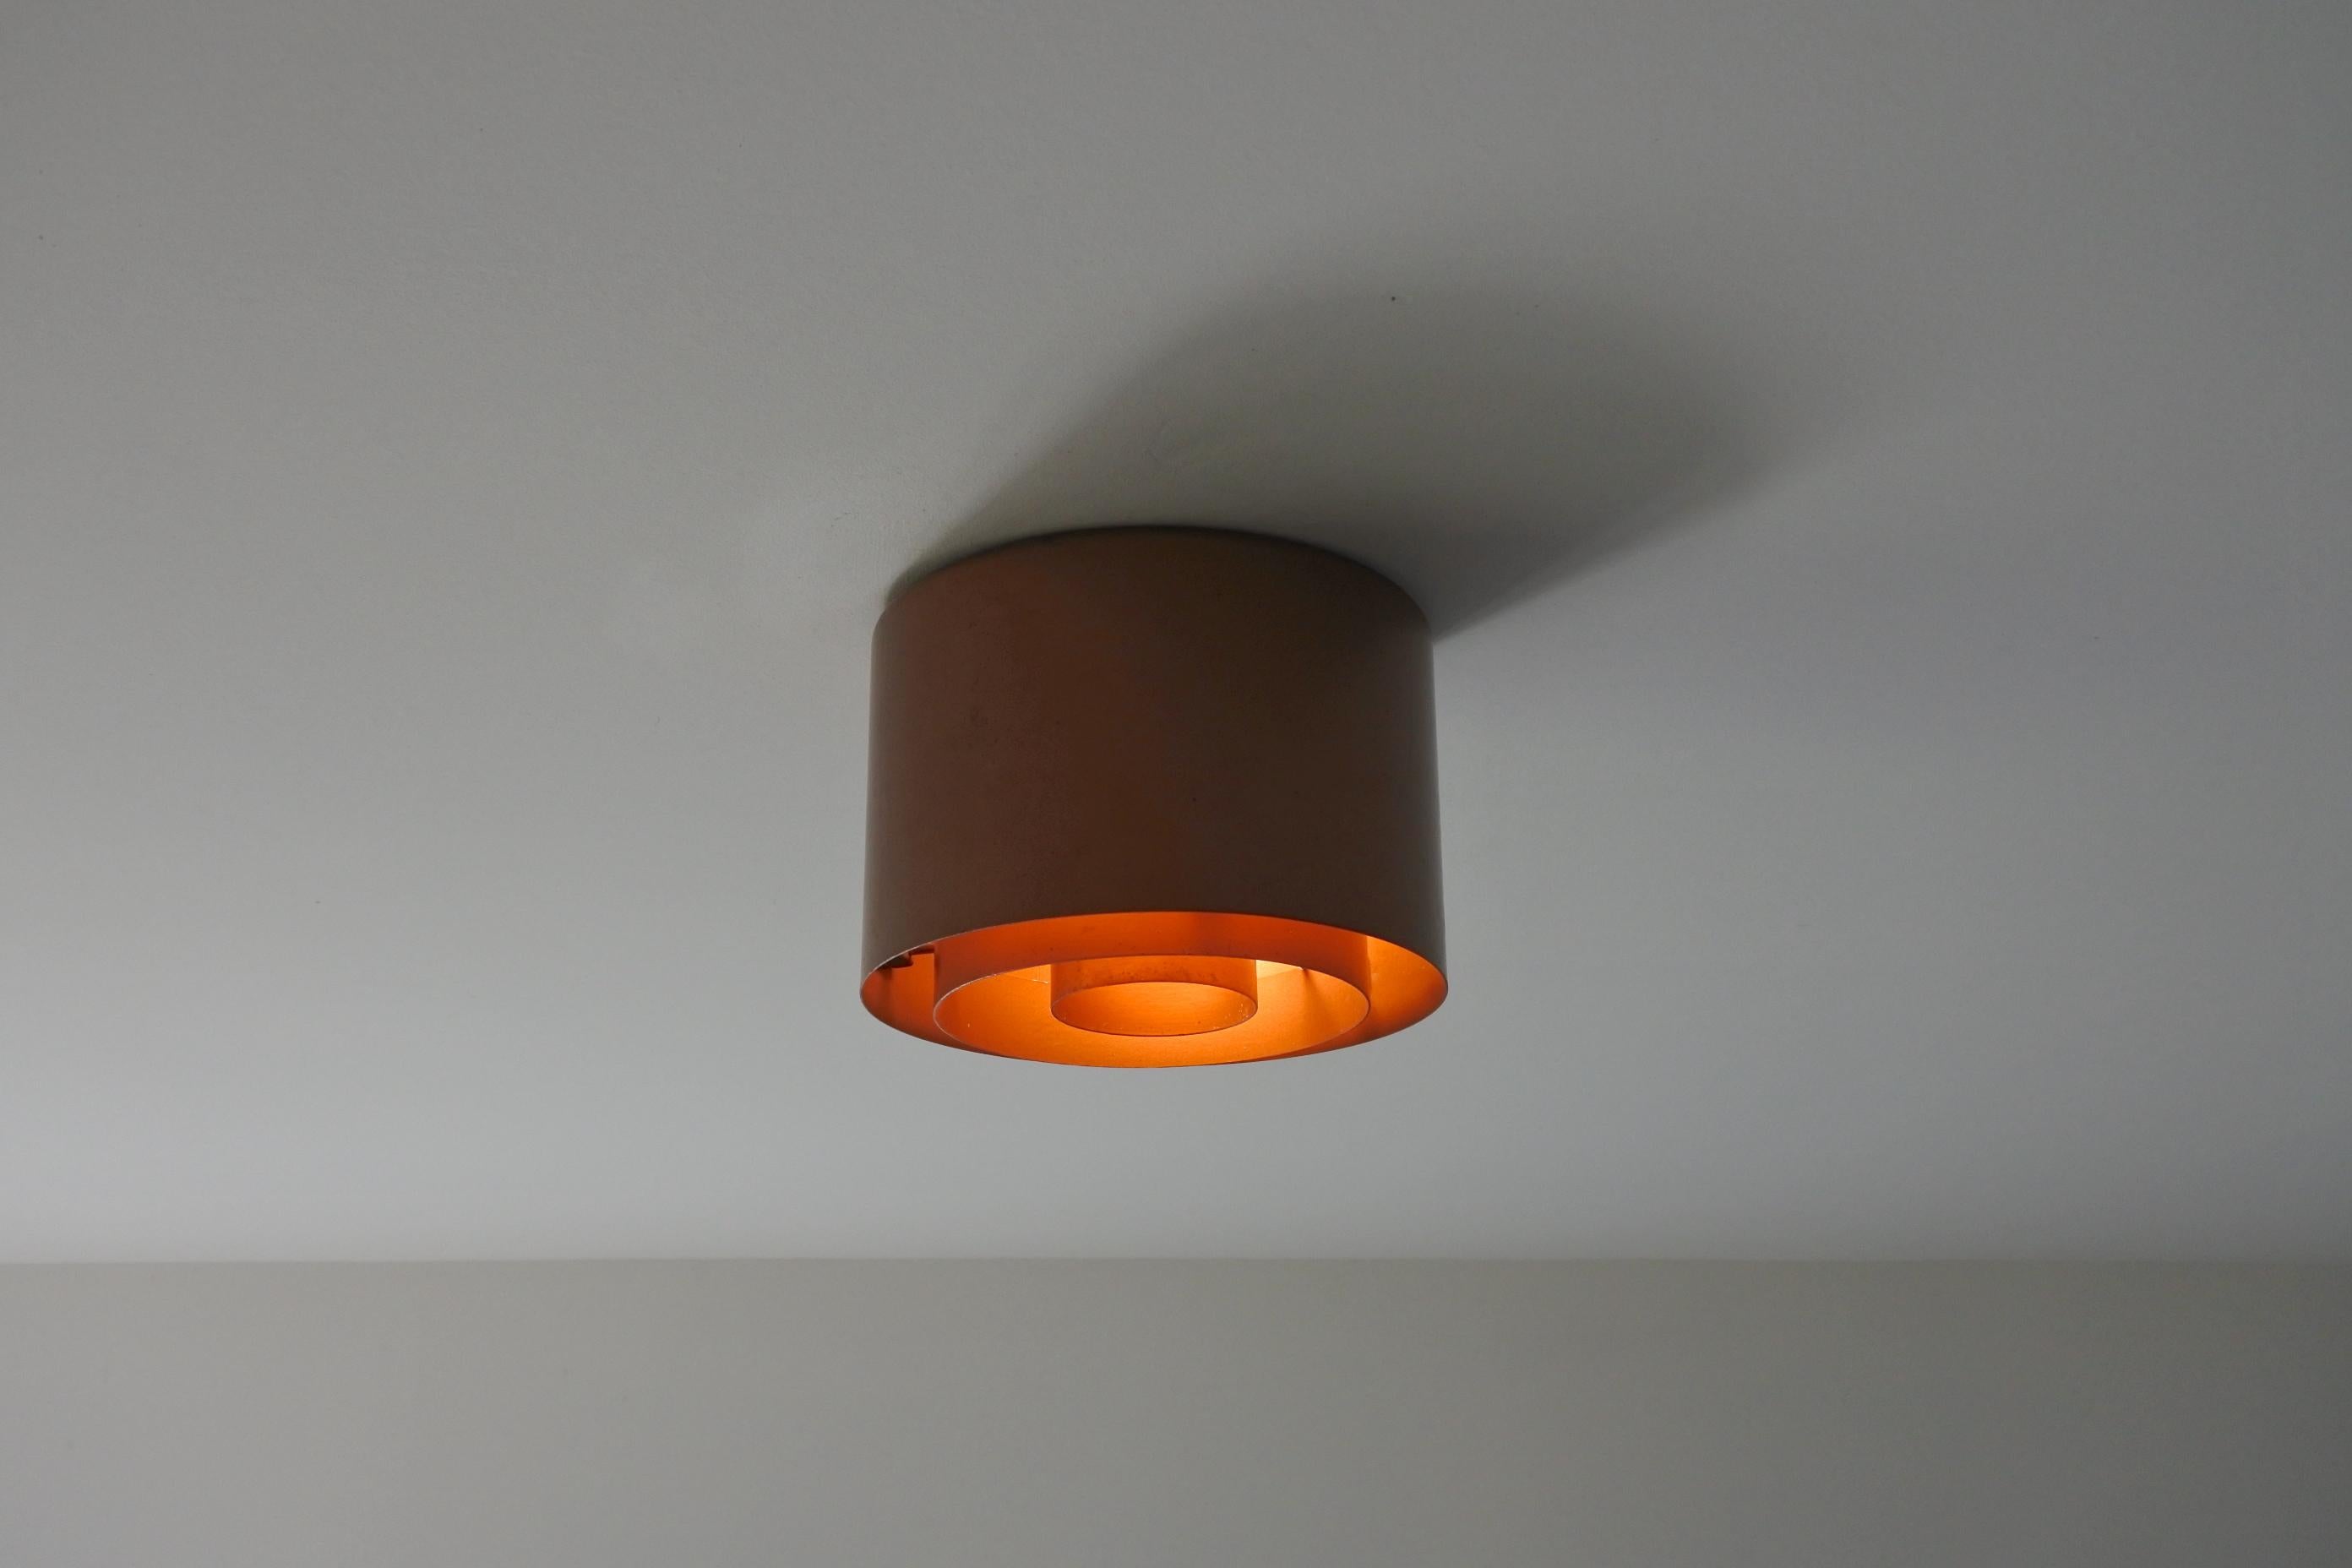 One flush mount ceiling light model H2-28.
Designed and manufactured by Idman Oy in Finland in the 1960s. 
Copper lacquered metal. 
The light takes one E27 bulb.
Manufacturer's stamp.
Two available.
Outstanding ceiling lamp.

Original